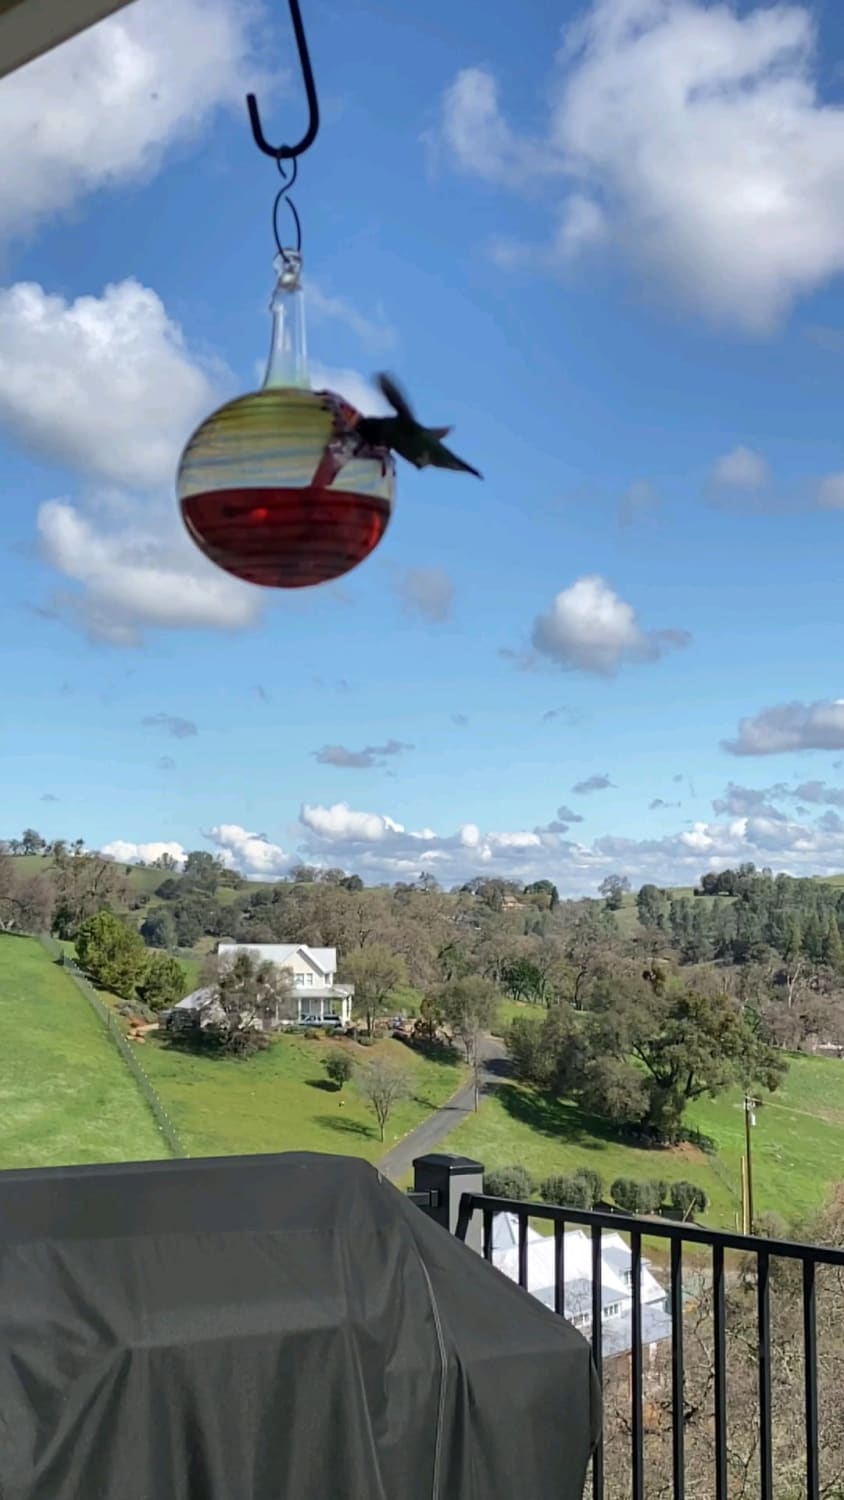 Look close, UFO flies across entire skyline in background while filming hummingbird in slo-mo